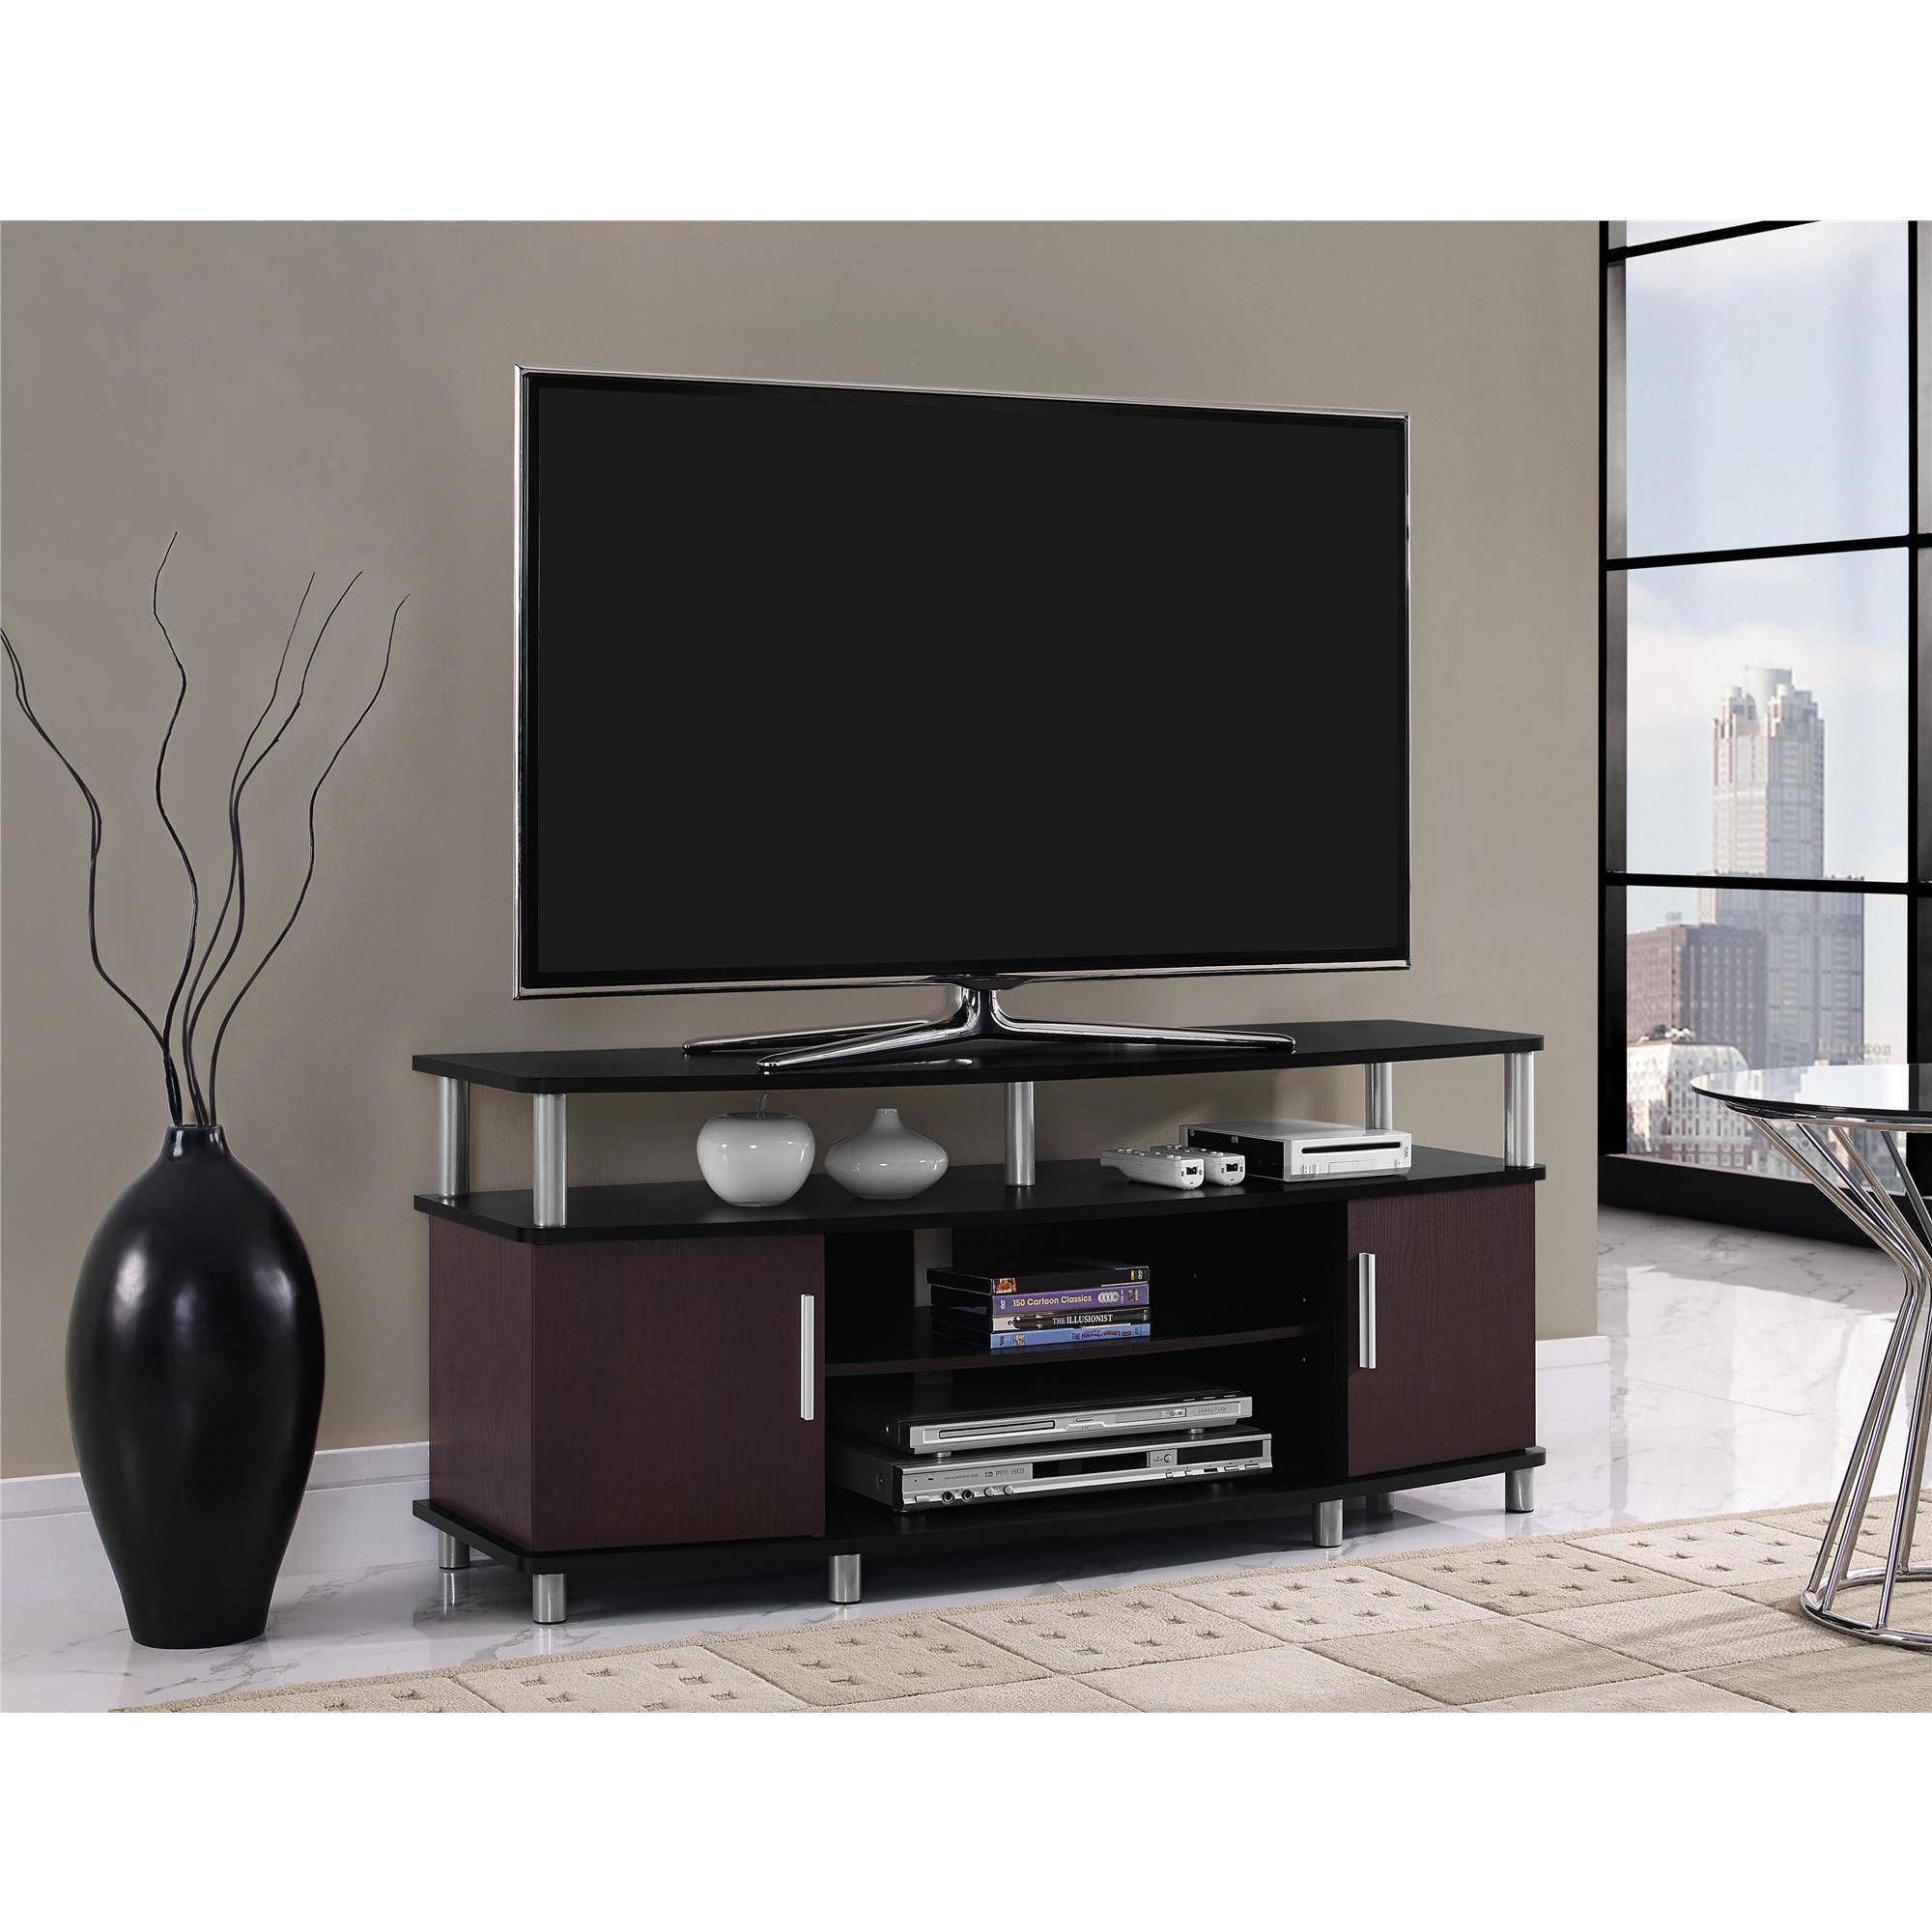 Tv Stands & Entertainment Centers – Walmart With Regard To Under Tv Cabinets (View 10 of 15)